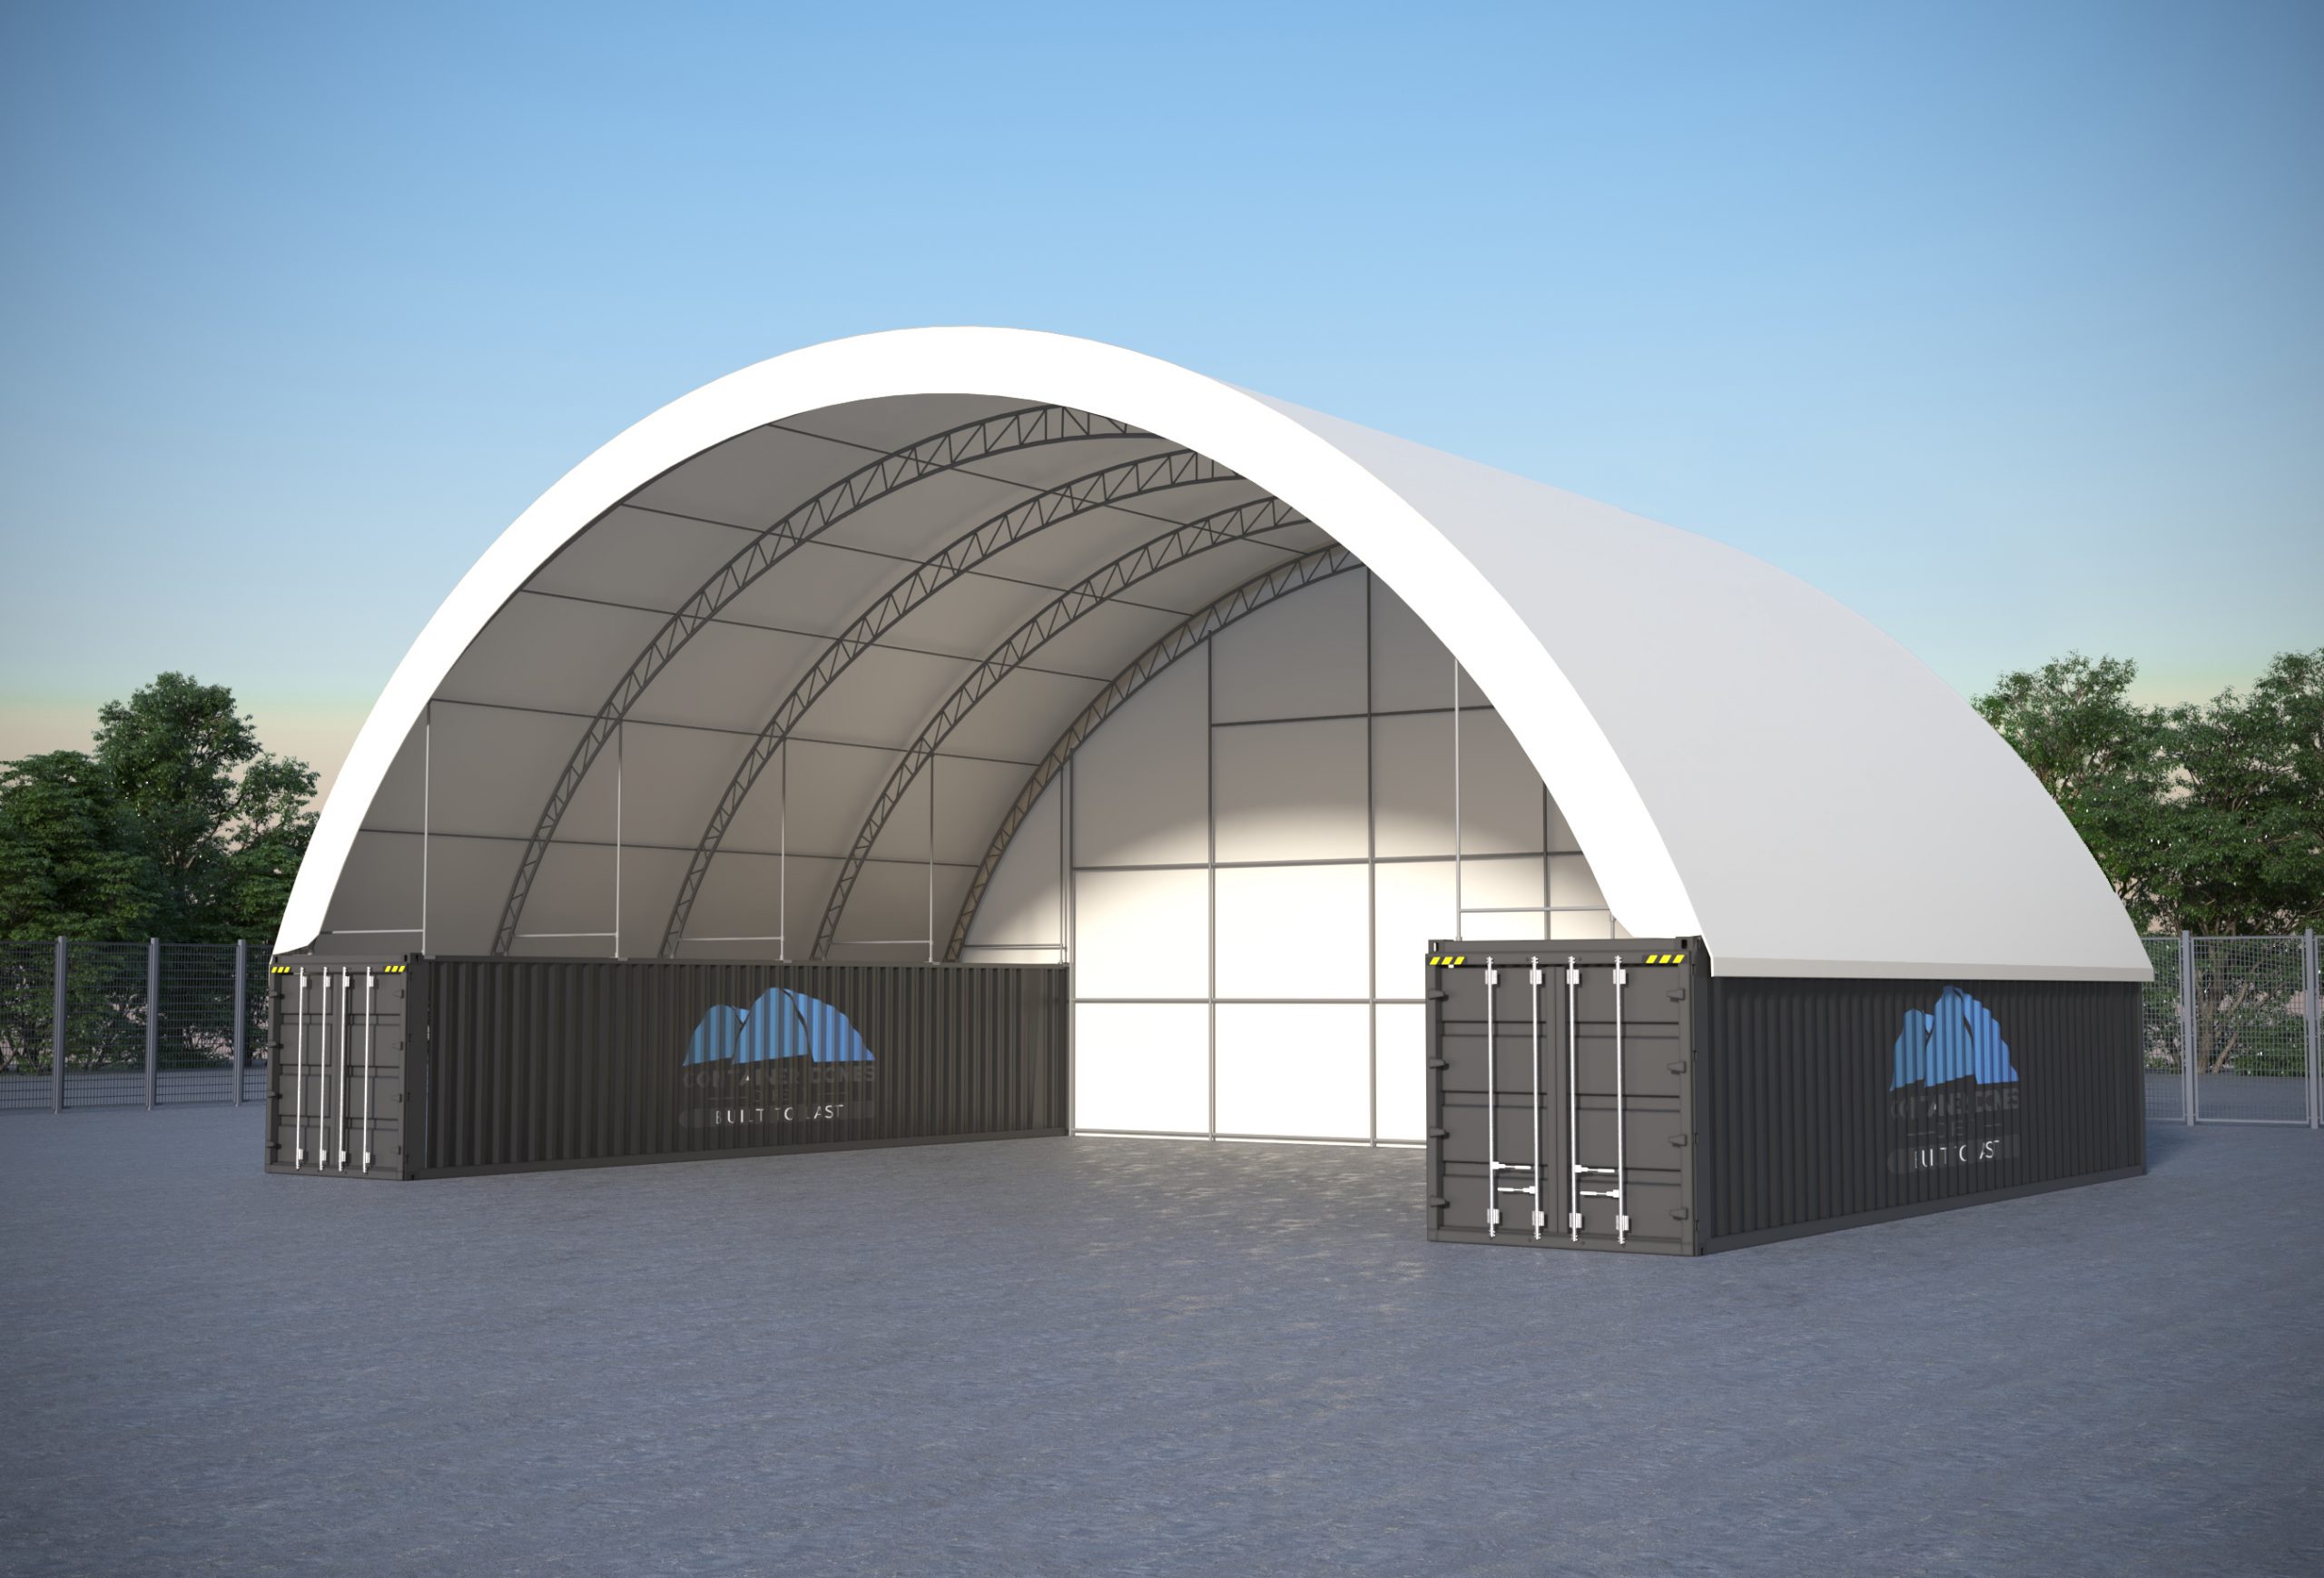 40 foot container dome shelter. Double truss design, with end wall for added weatherproofing.